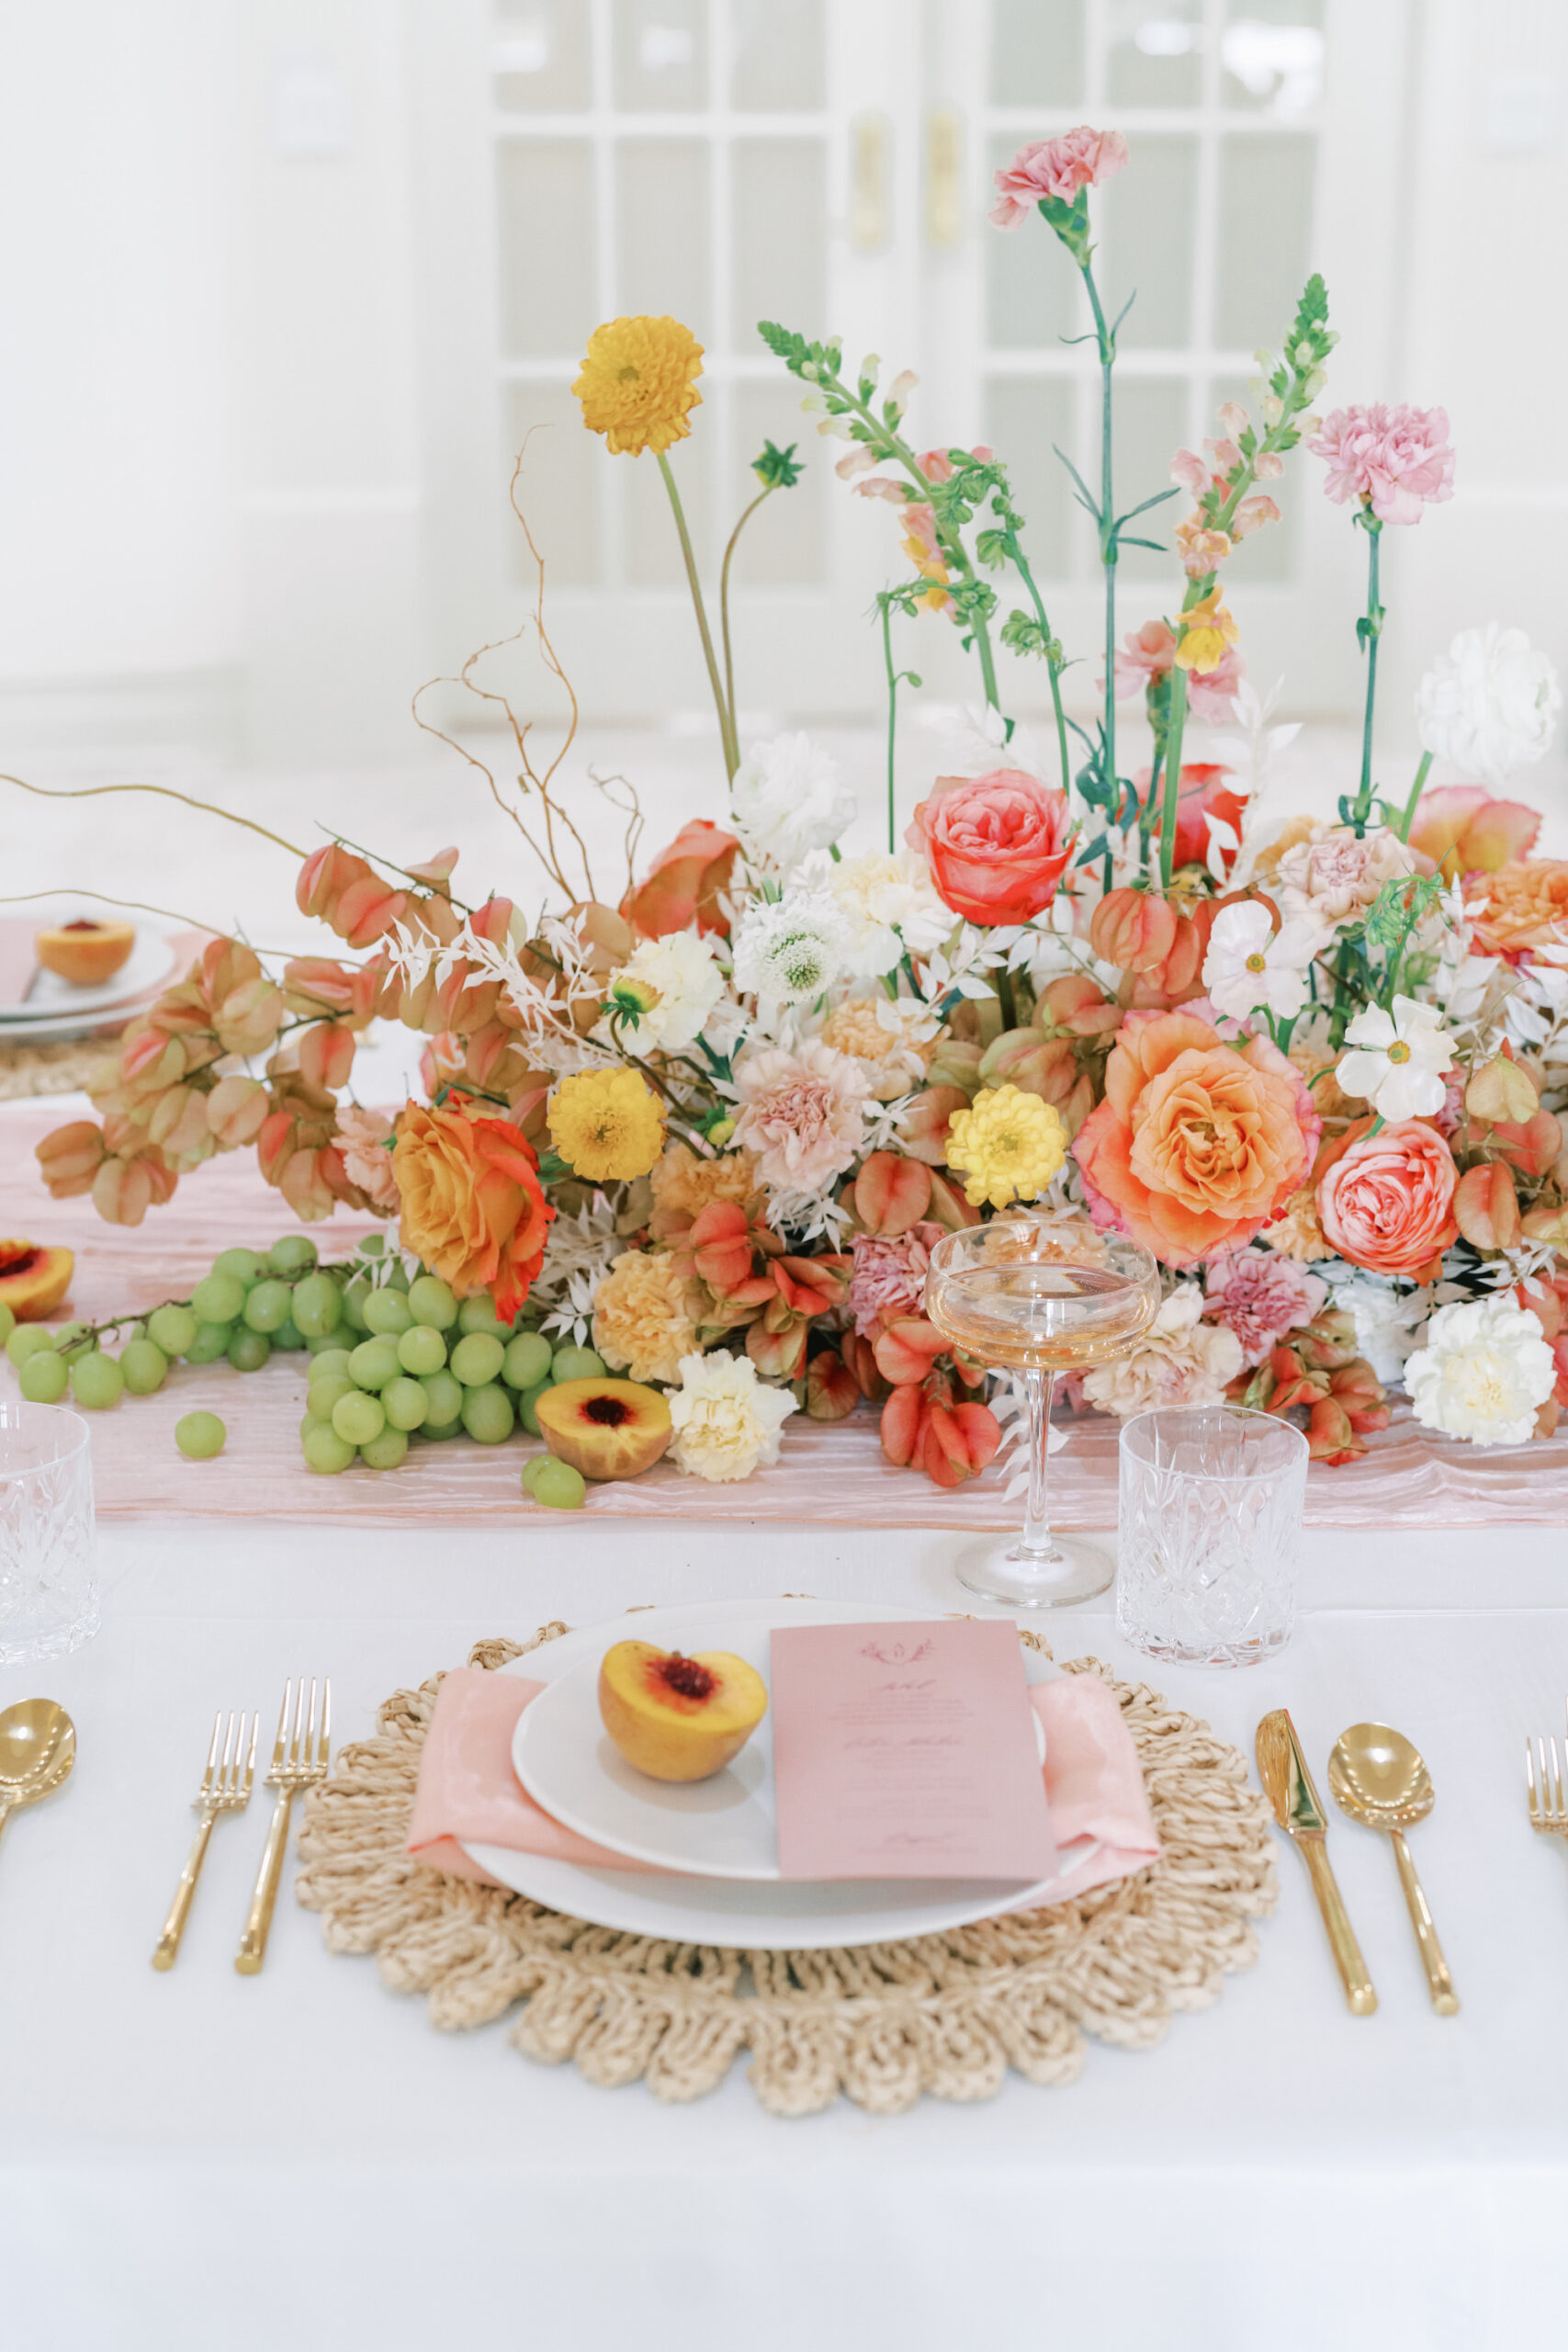 Yellow, Orange, and Pink Garden Rose Dahlia, and Wildflower Centerpiece Ideas | Gold Flatware | White Tablecloth Linen | Individual Menu Inspiration | Hyacinth Placemat | Peach Themed Wedding Inspiration | Stationer A&P Designs